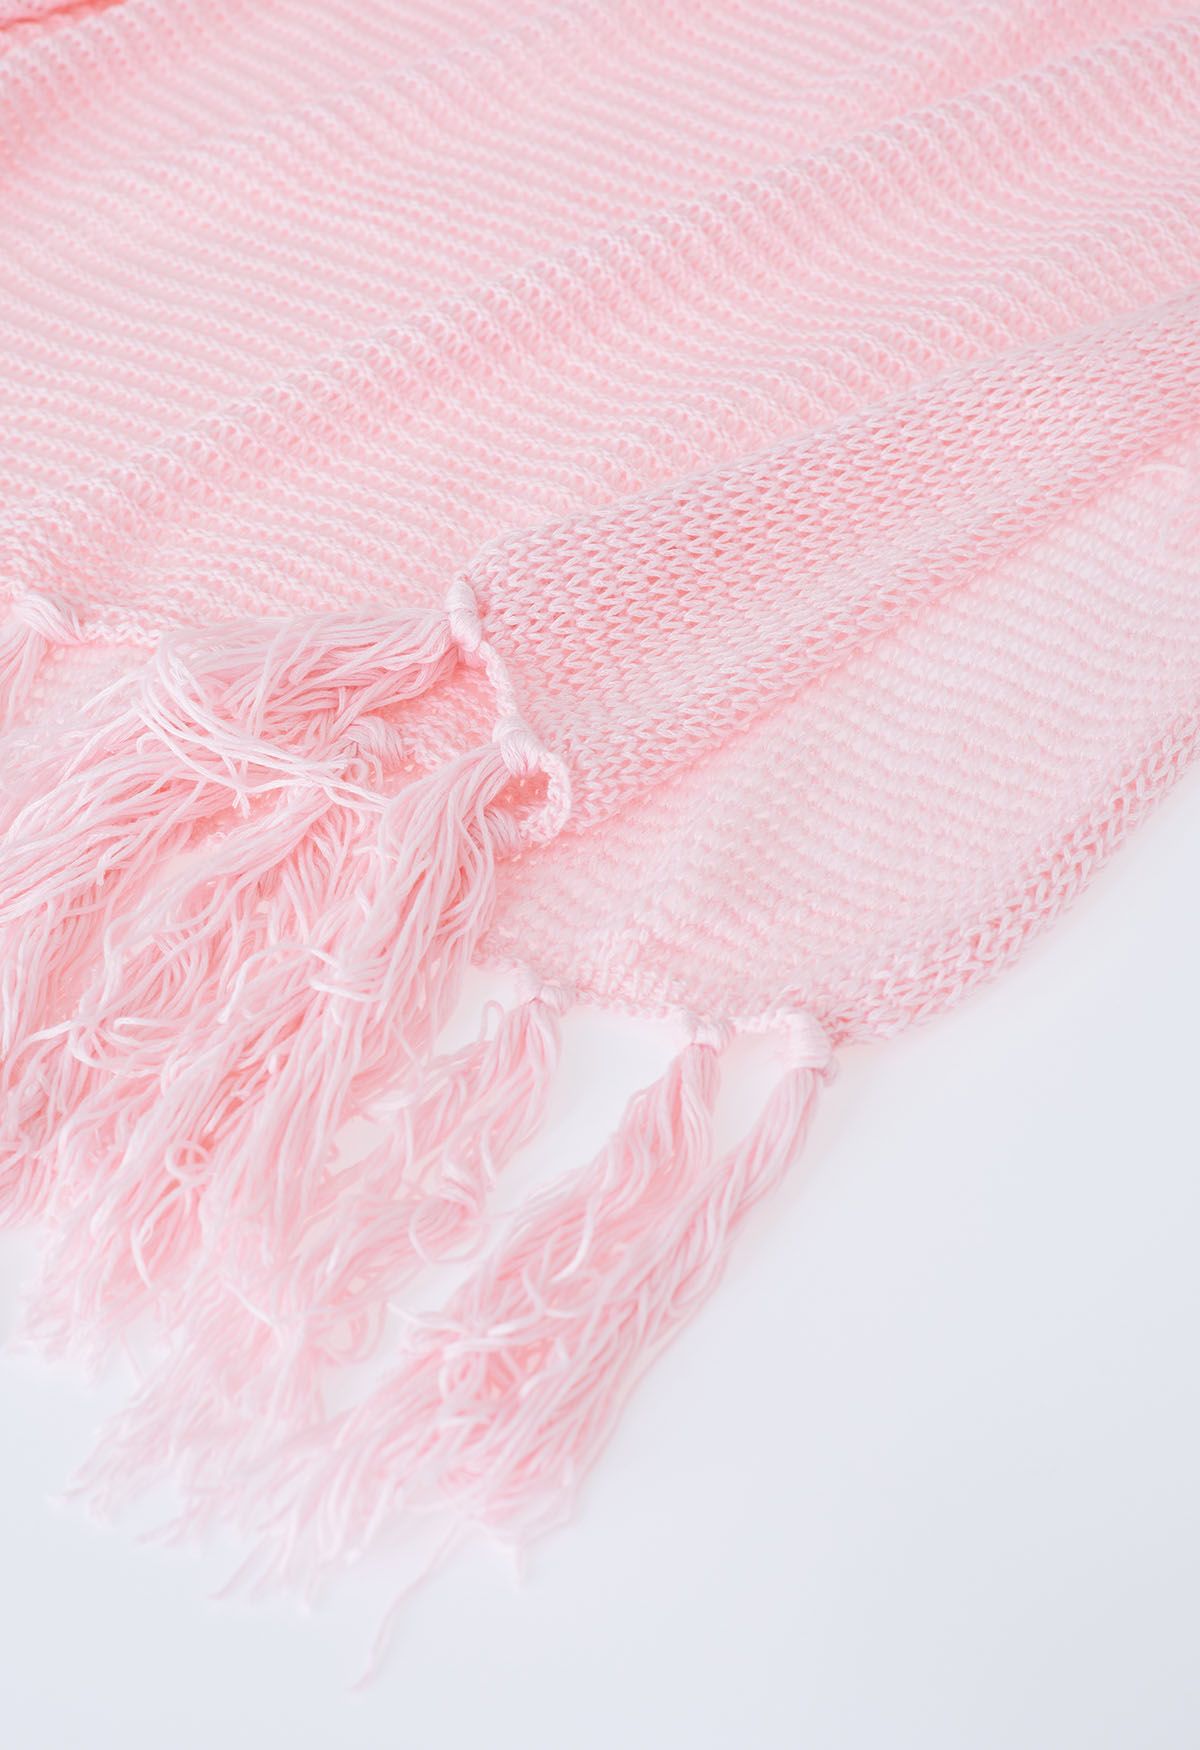 Fringed Hem Pointelle Knit Cover Up in Pink